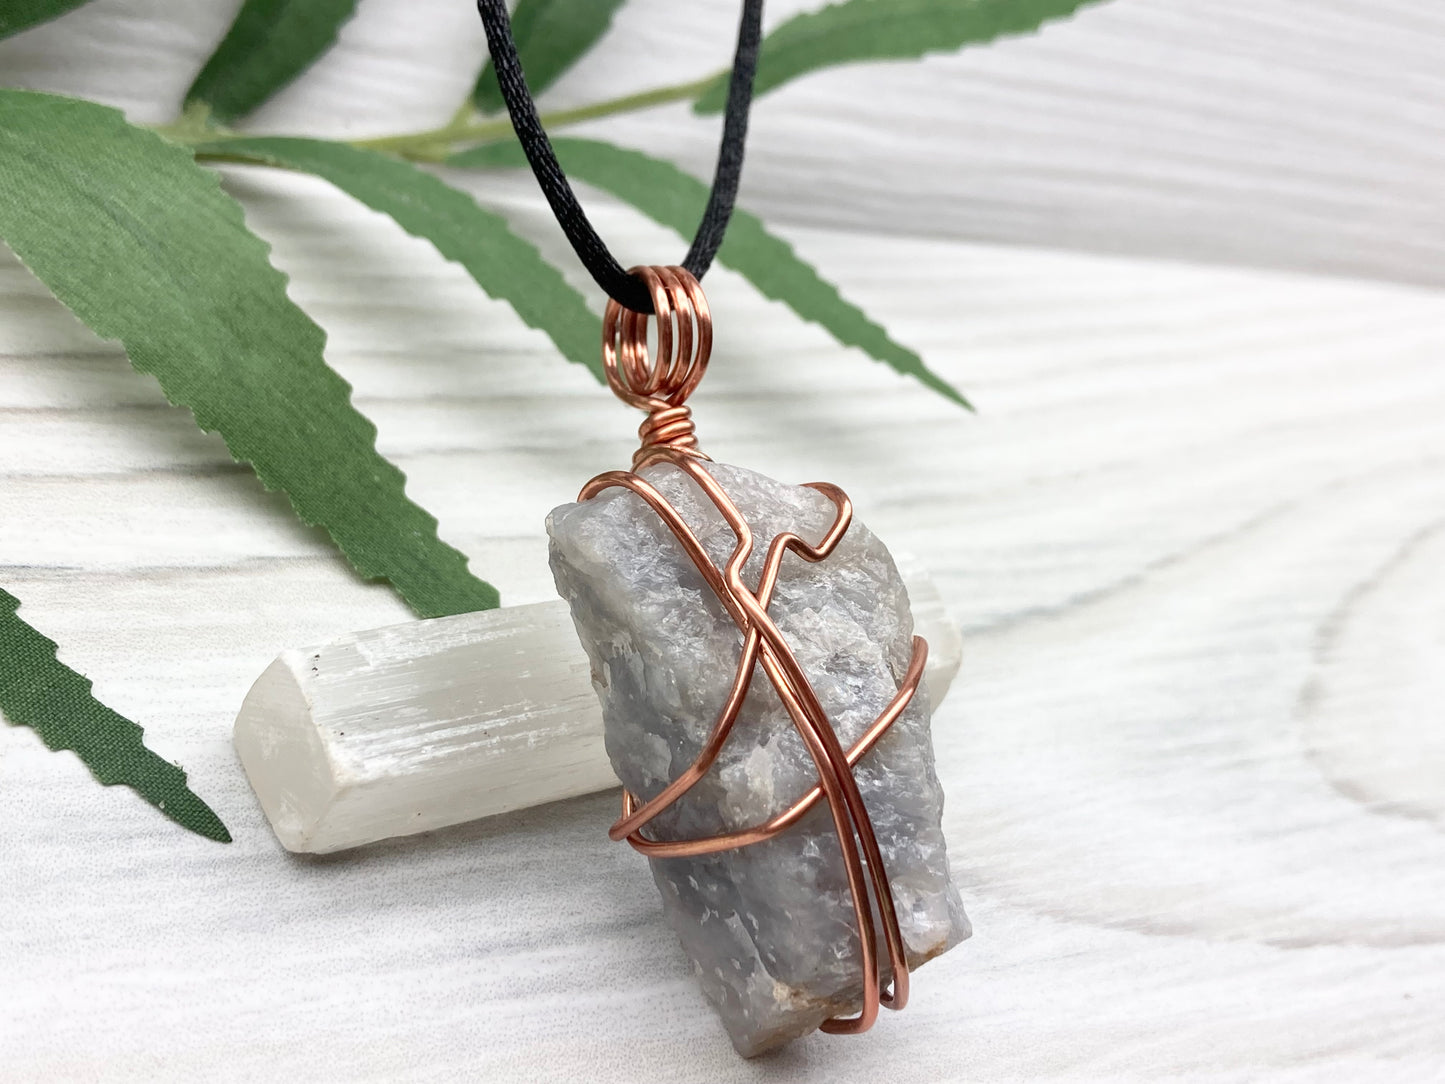 Blue Quartz Crystal Necklace. Light Blue Copper Wire Wrapped Stone. Rough Gemstone On A Black Chain. Throat Chakra Stone. New Age Spiritual Jewelry